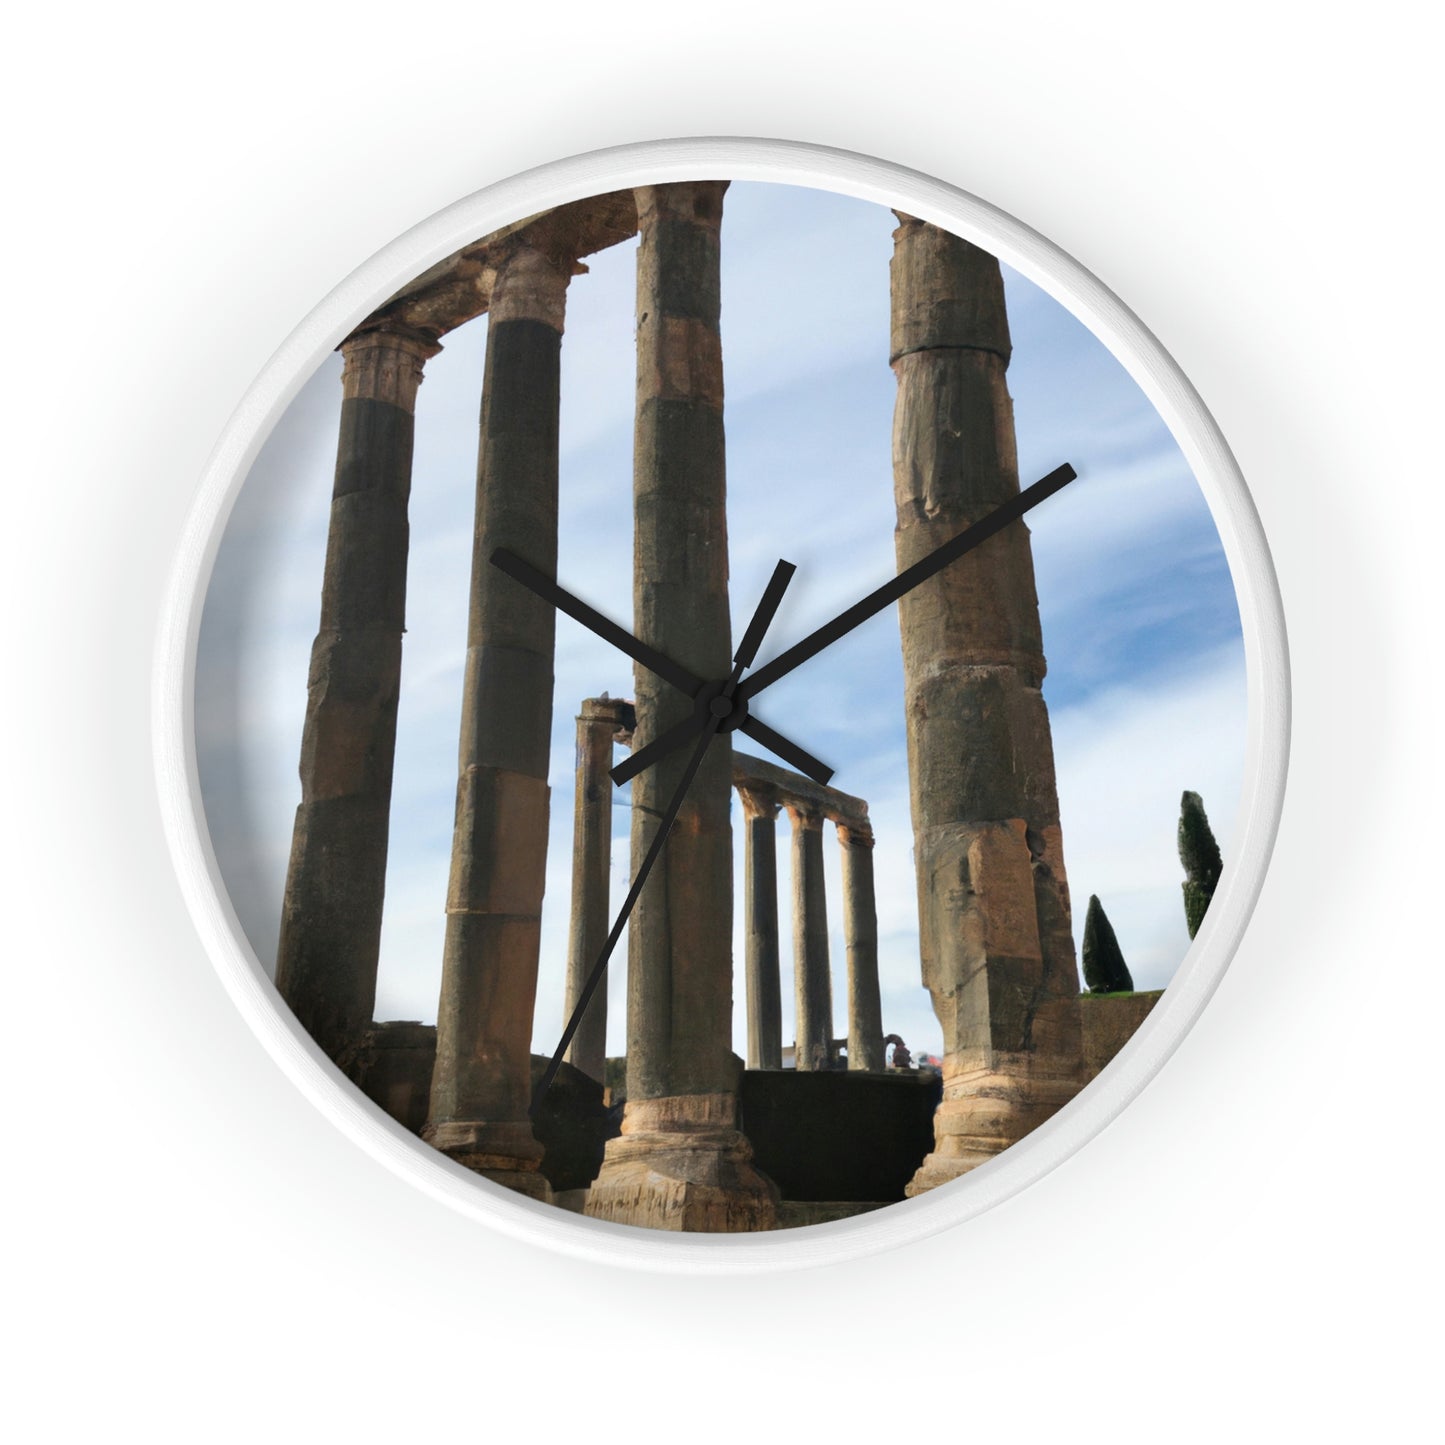 "Lost in Ancient Ruins: A Wanderlust Odyssey" - The Alien Wall Clock